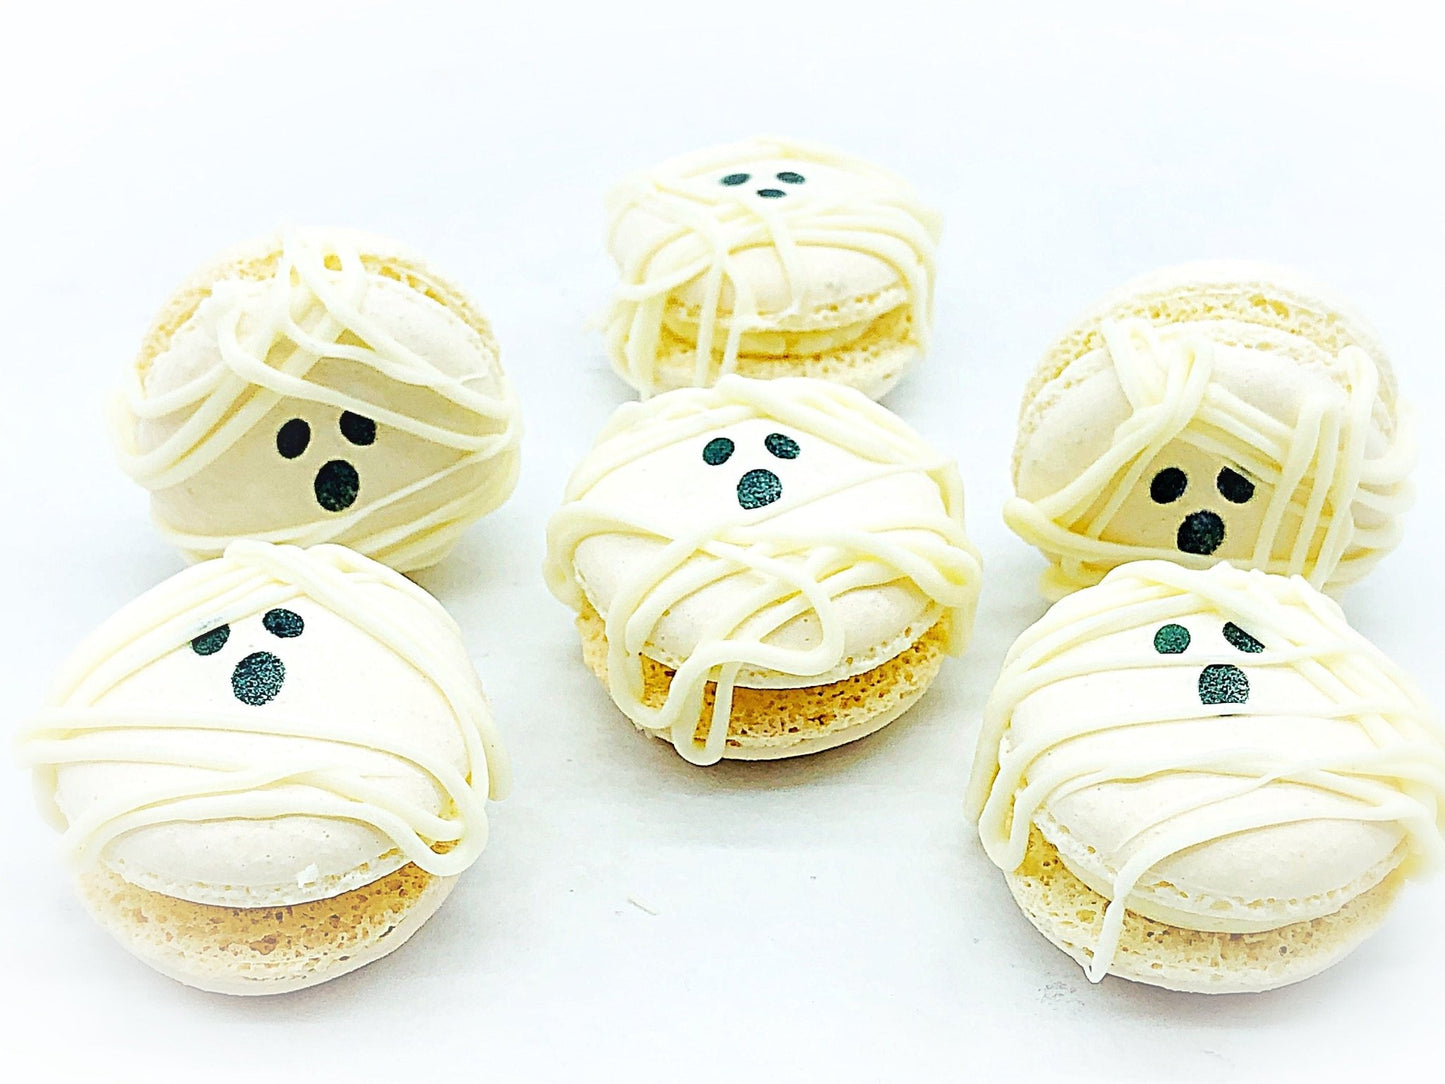 Mummy French Macarons (White) | Available in 6, 12 or 24 Pack - Macaron Centrale6 Pack